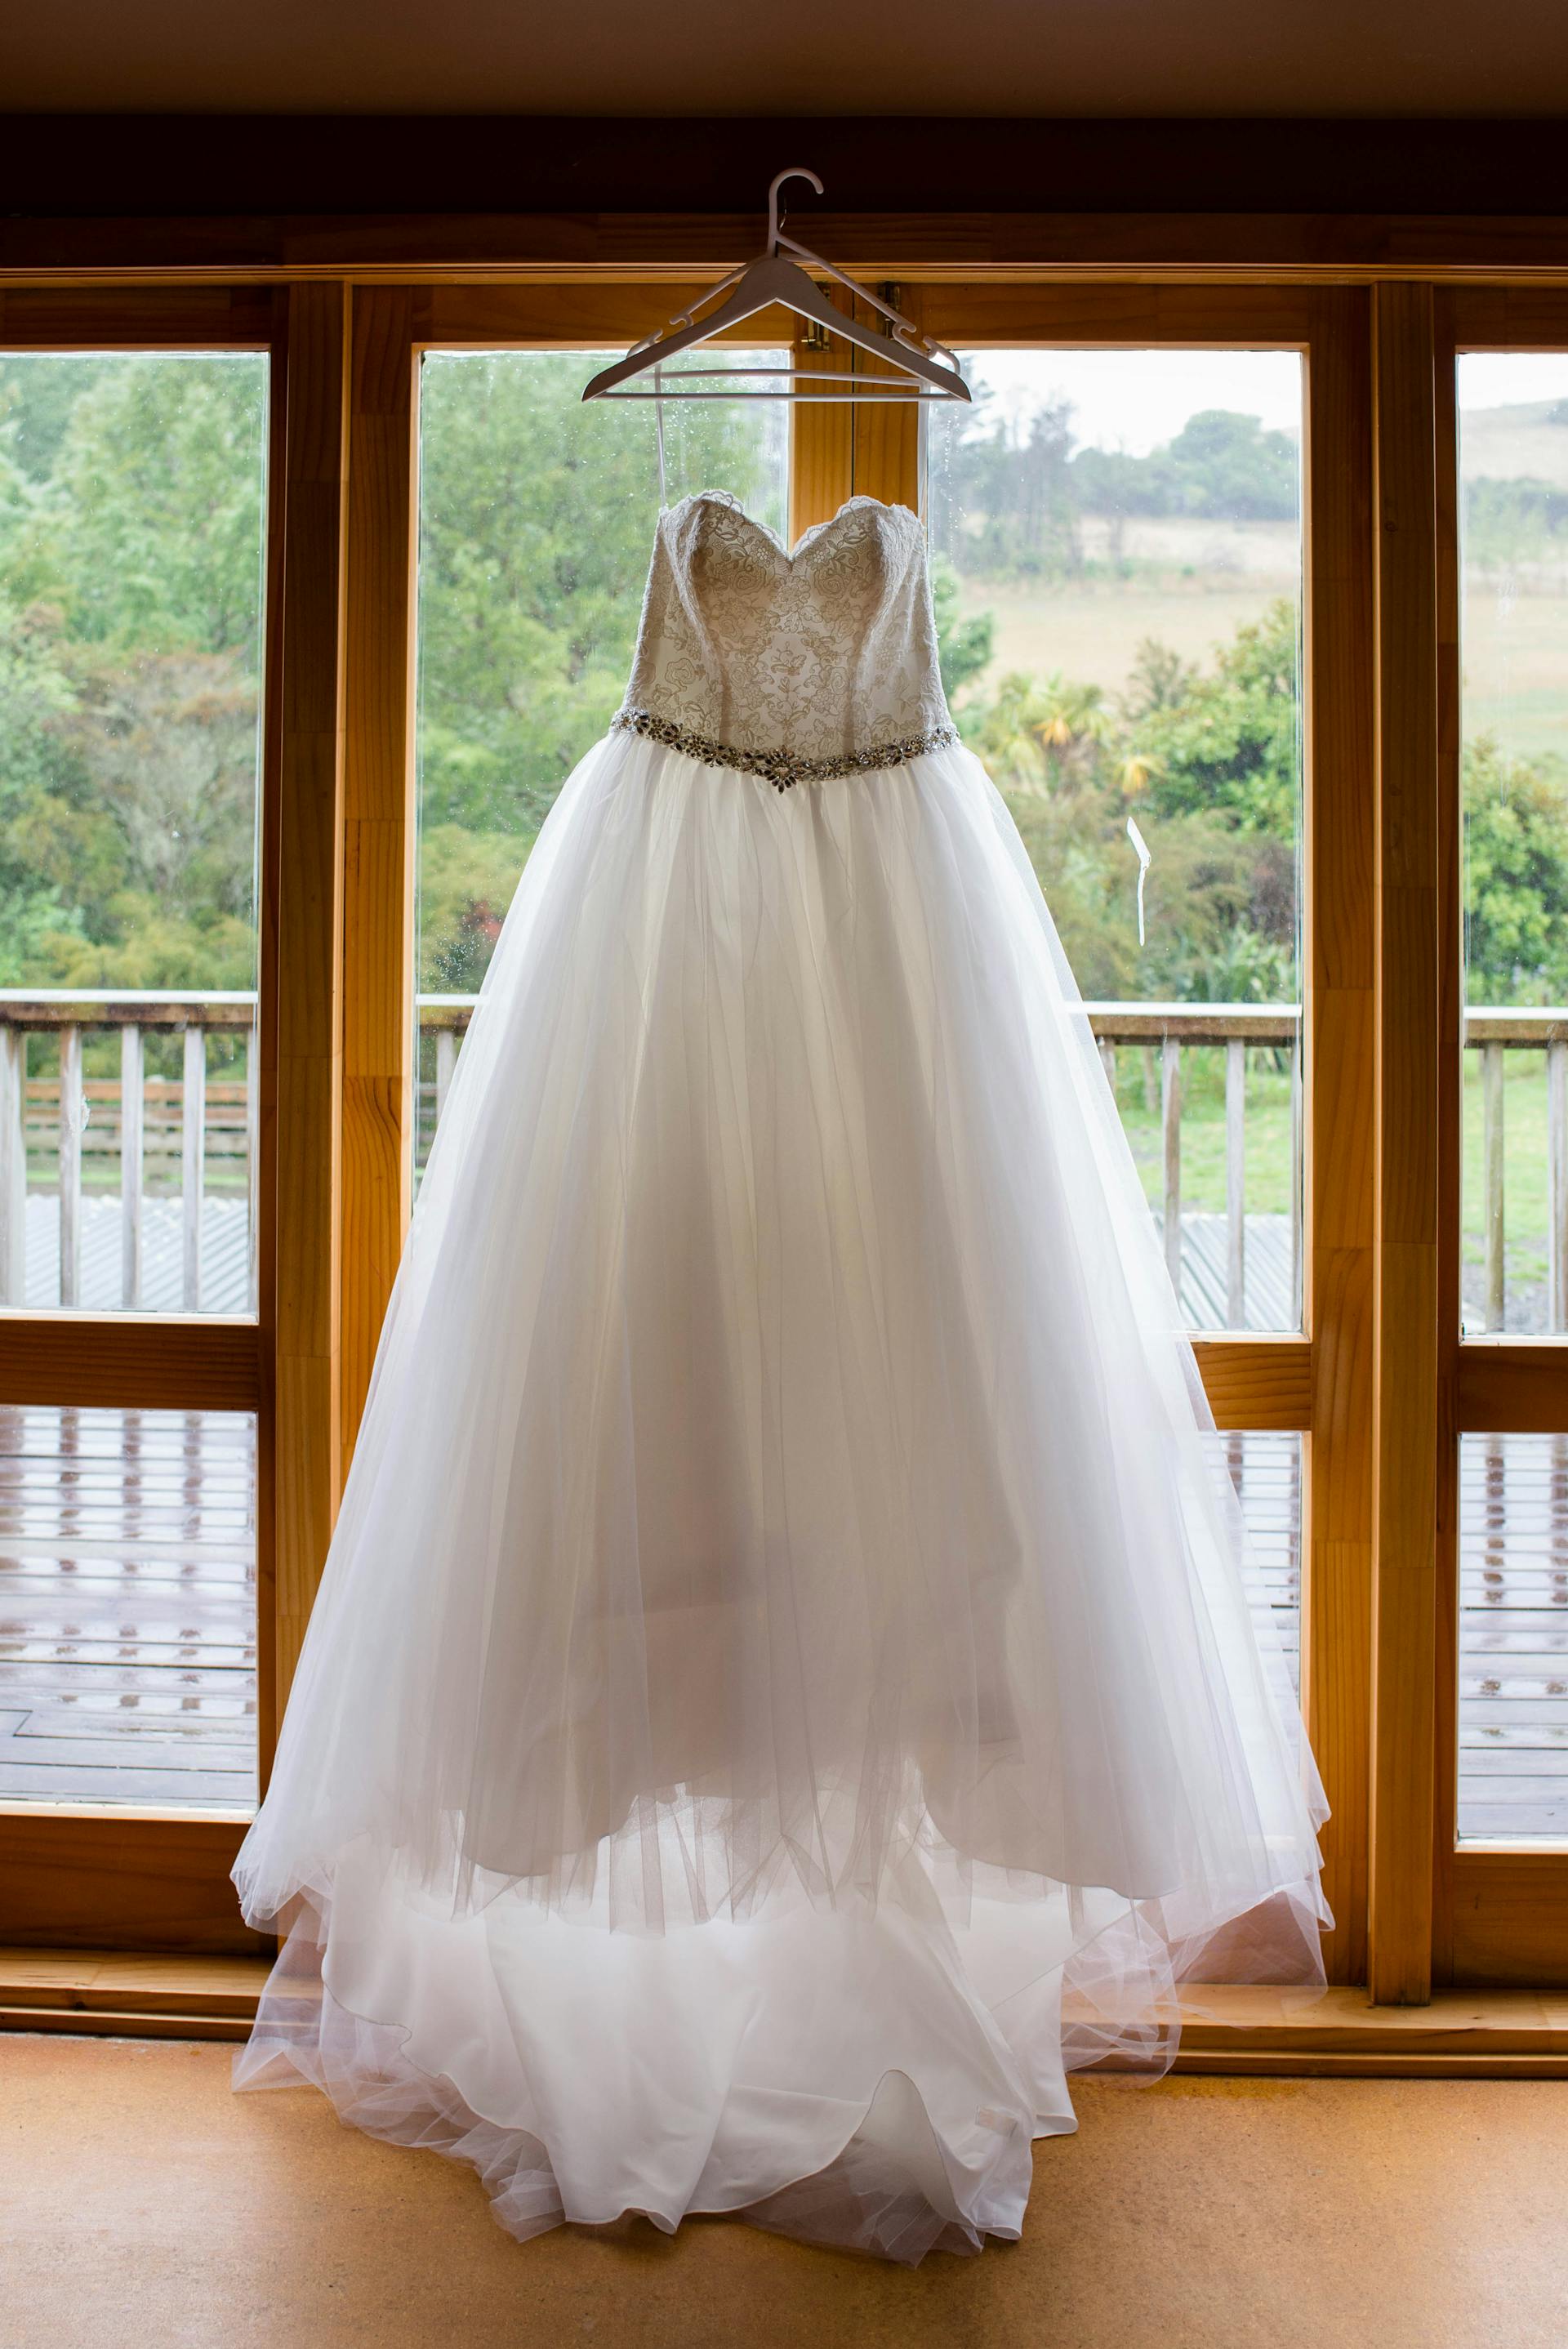 A wedding dress hanging from the window | Source: Pexels